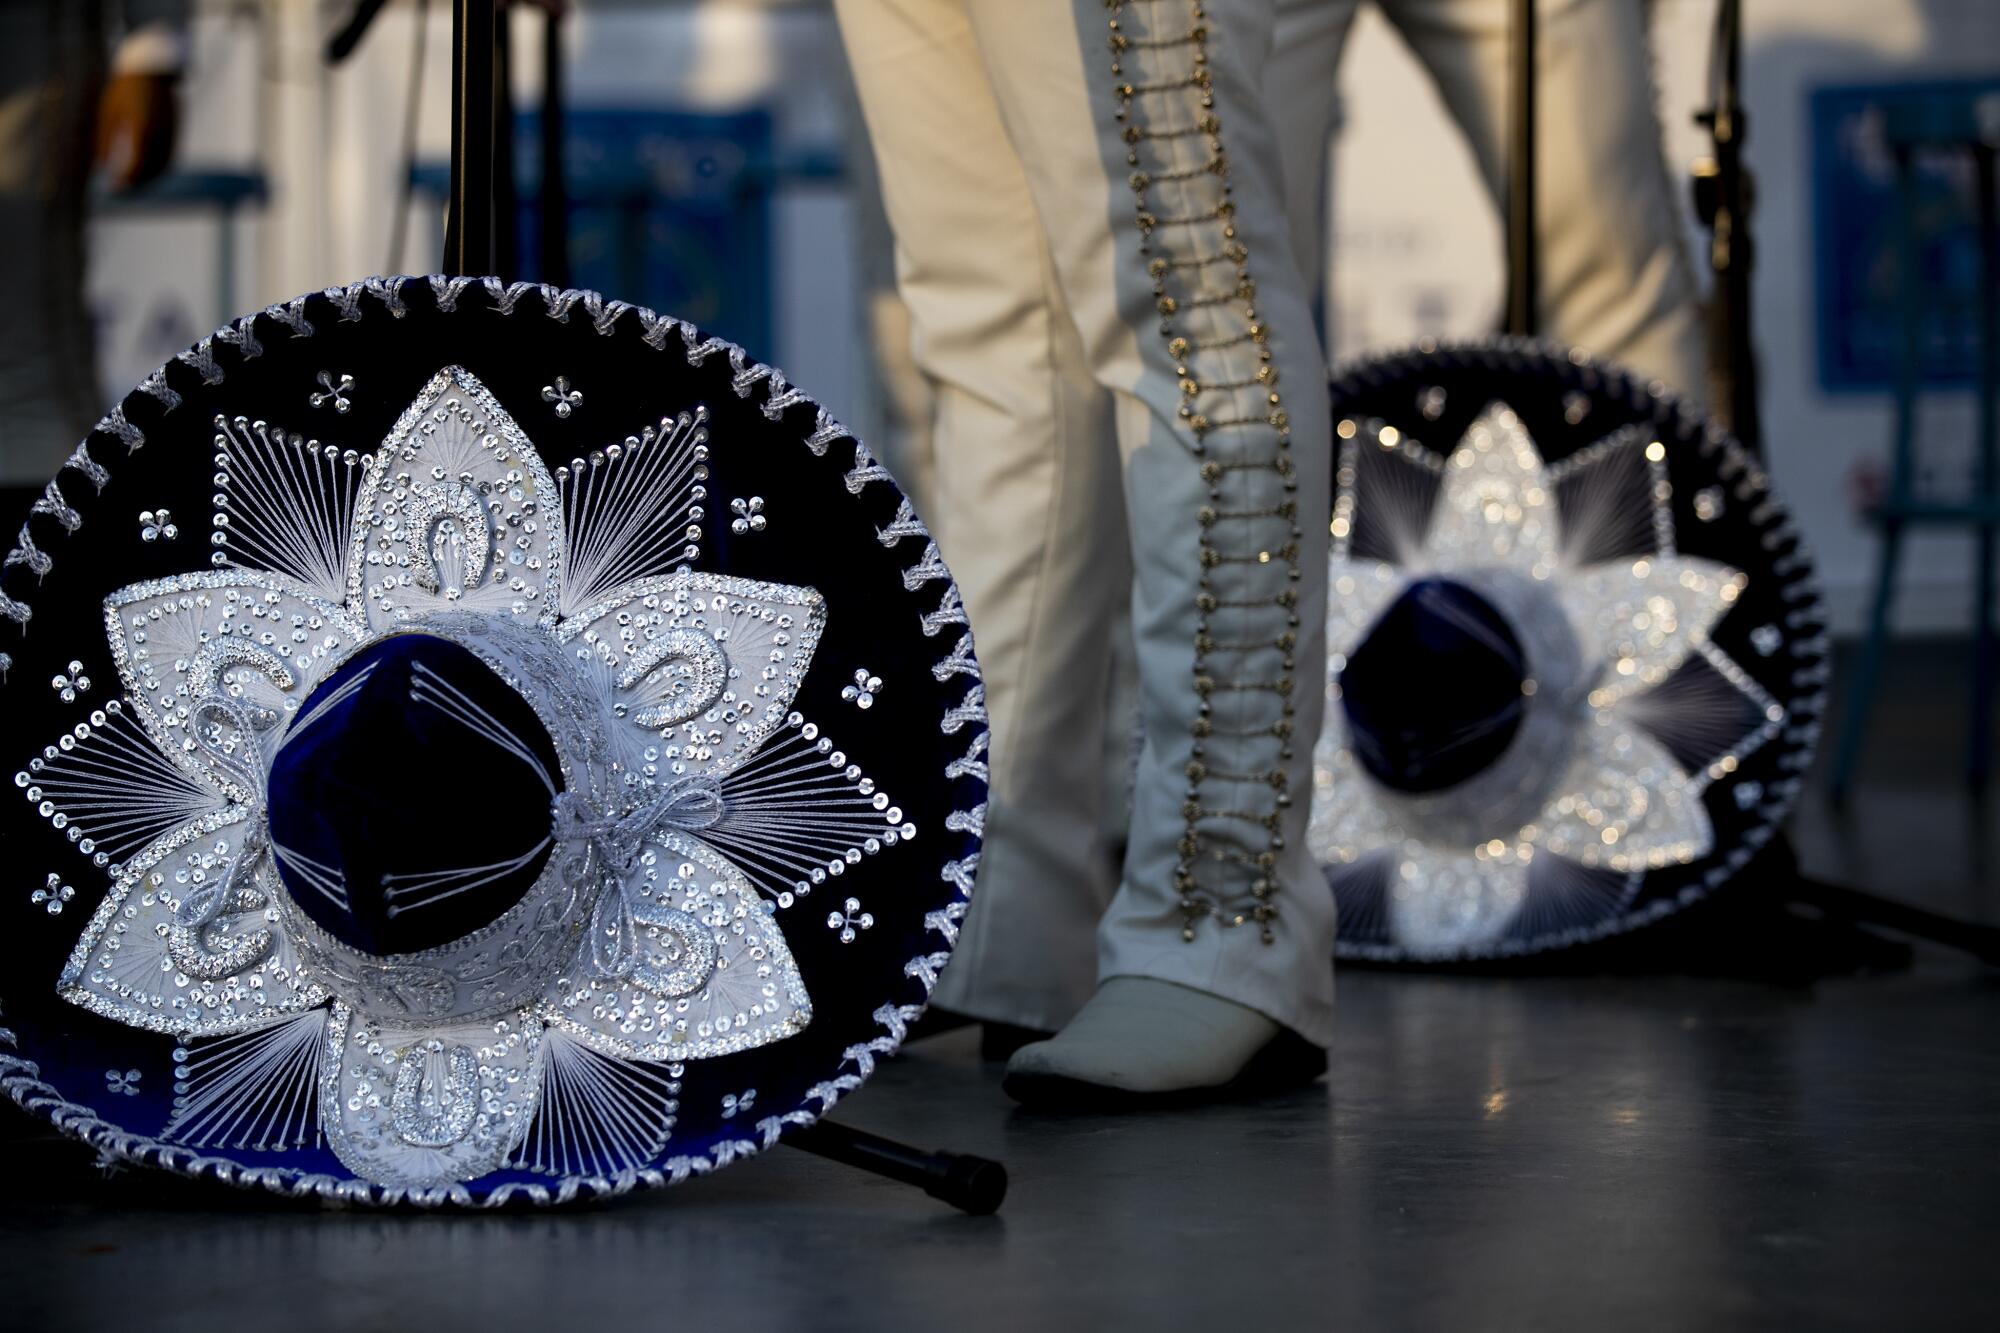 Dodger blue Mexican sombreros are displayed by each member of Mariachi Garibaldi de Jaime Cuellar as they perform.